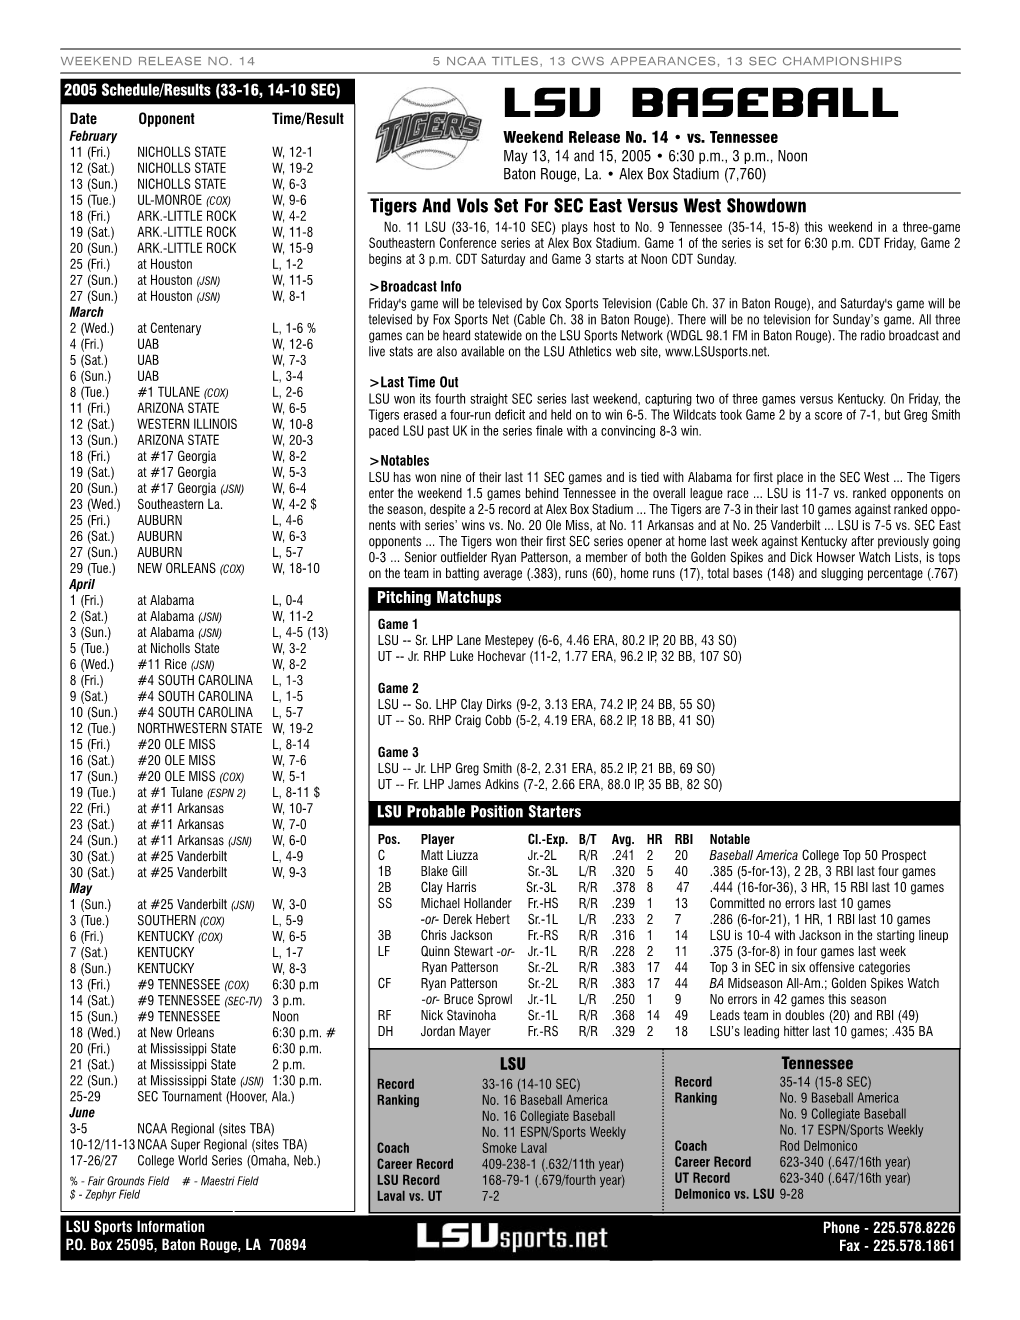 LSU Vs. Tennessee Game Notes 5.8.05.Qxd